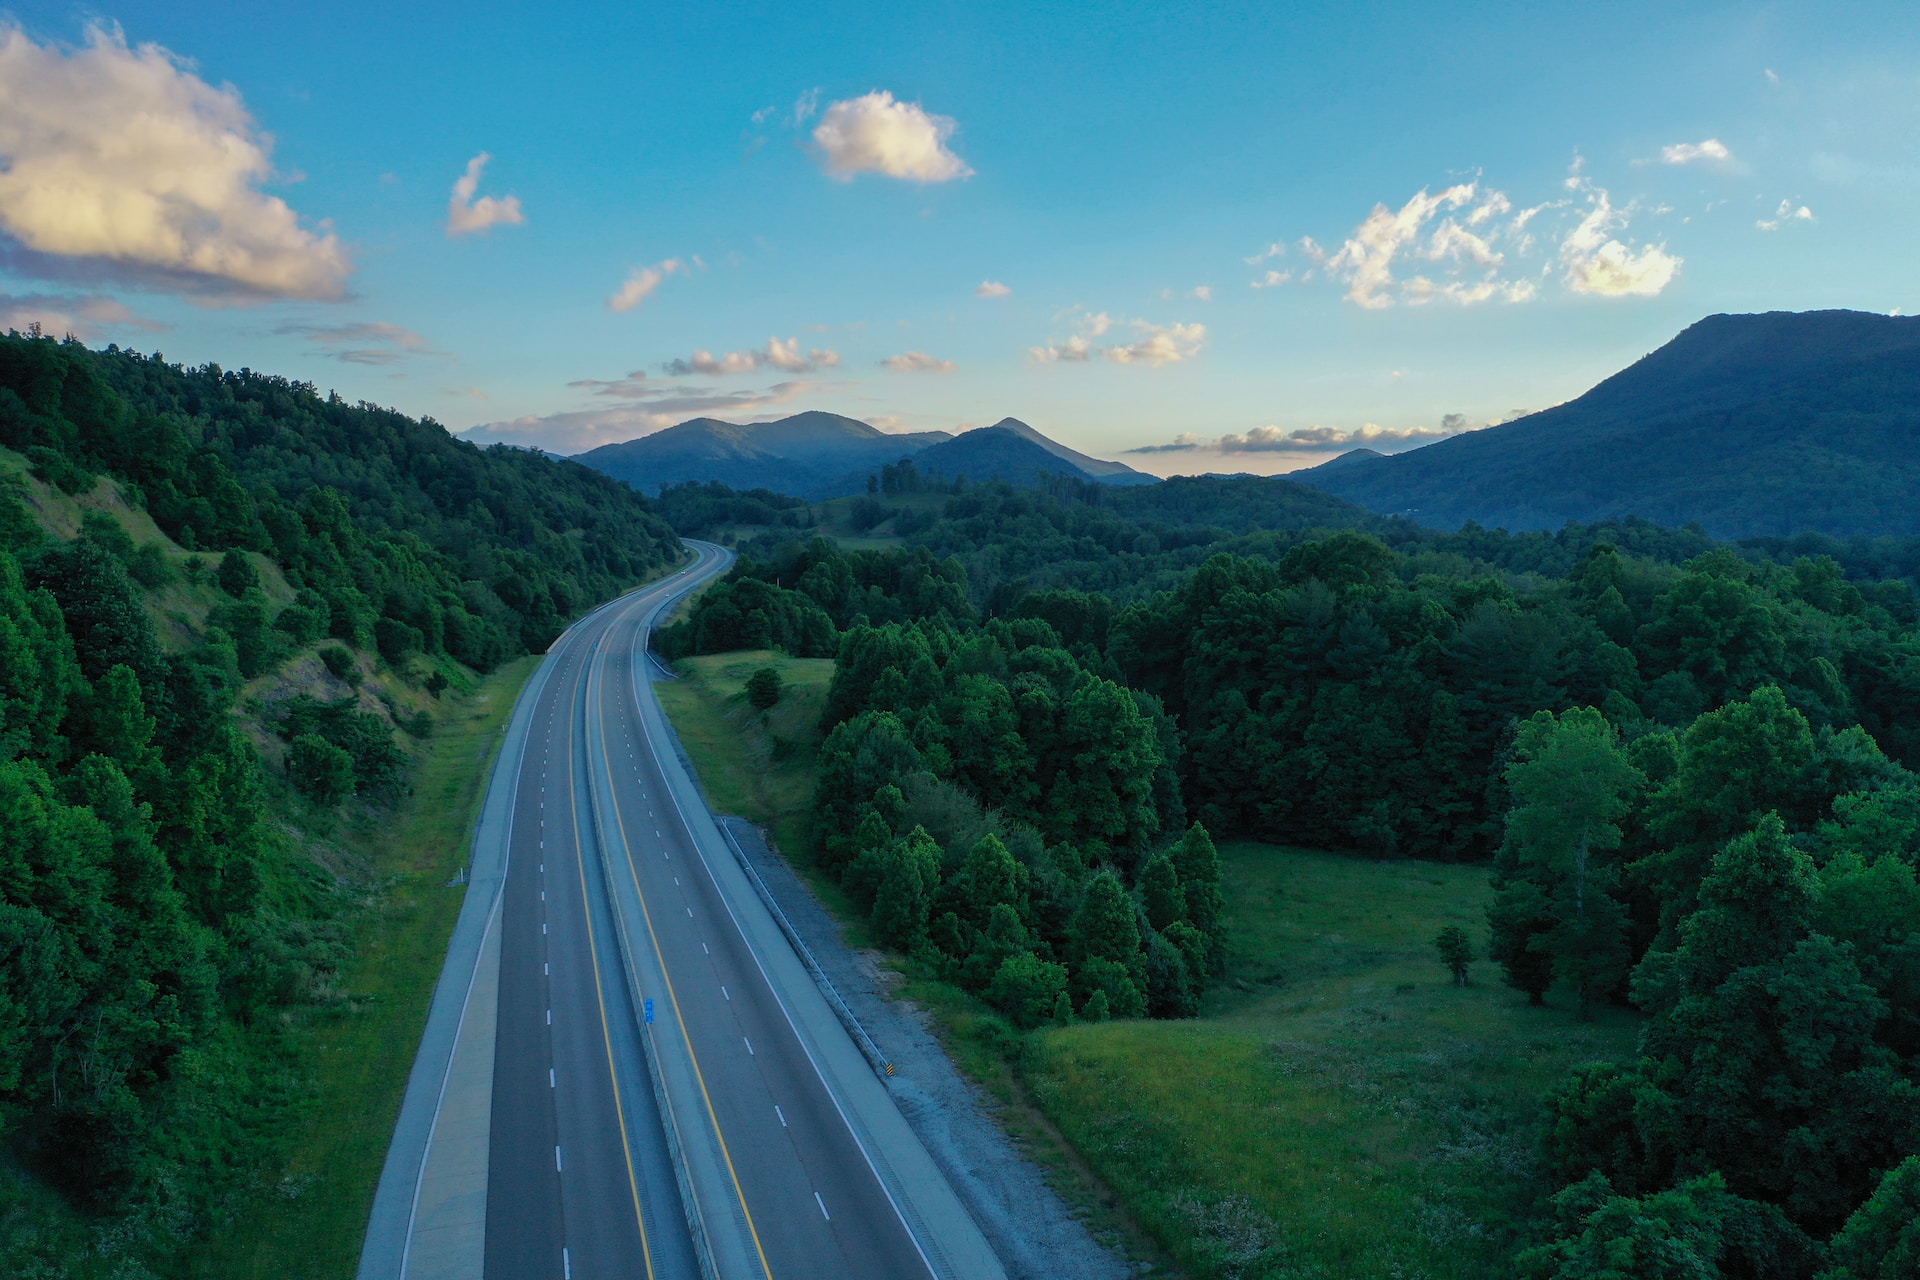 The highway in Tennessee.